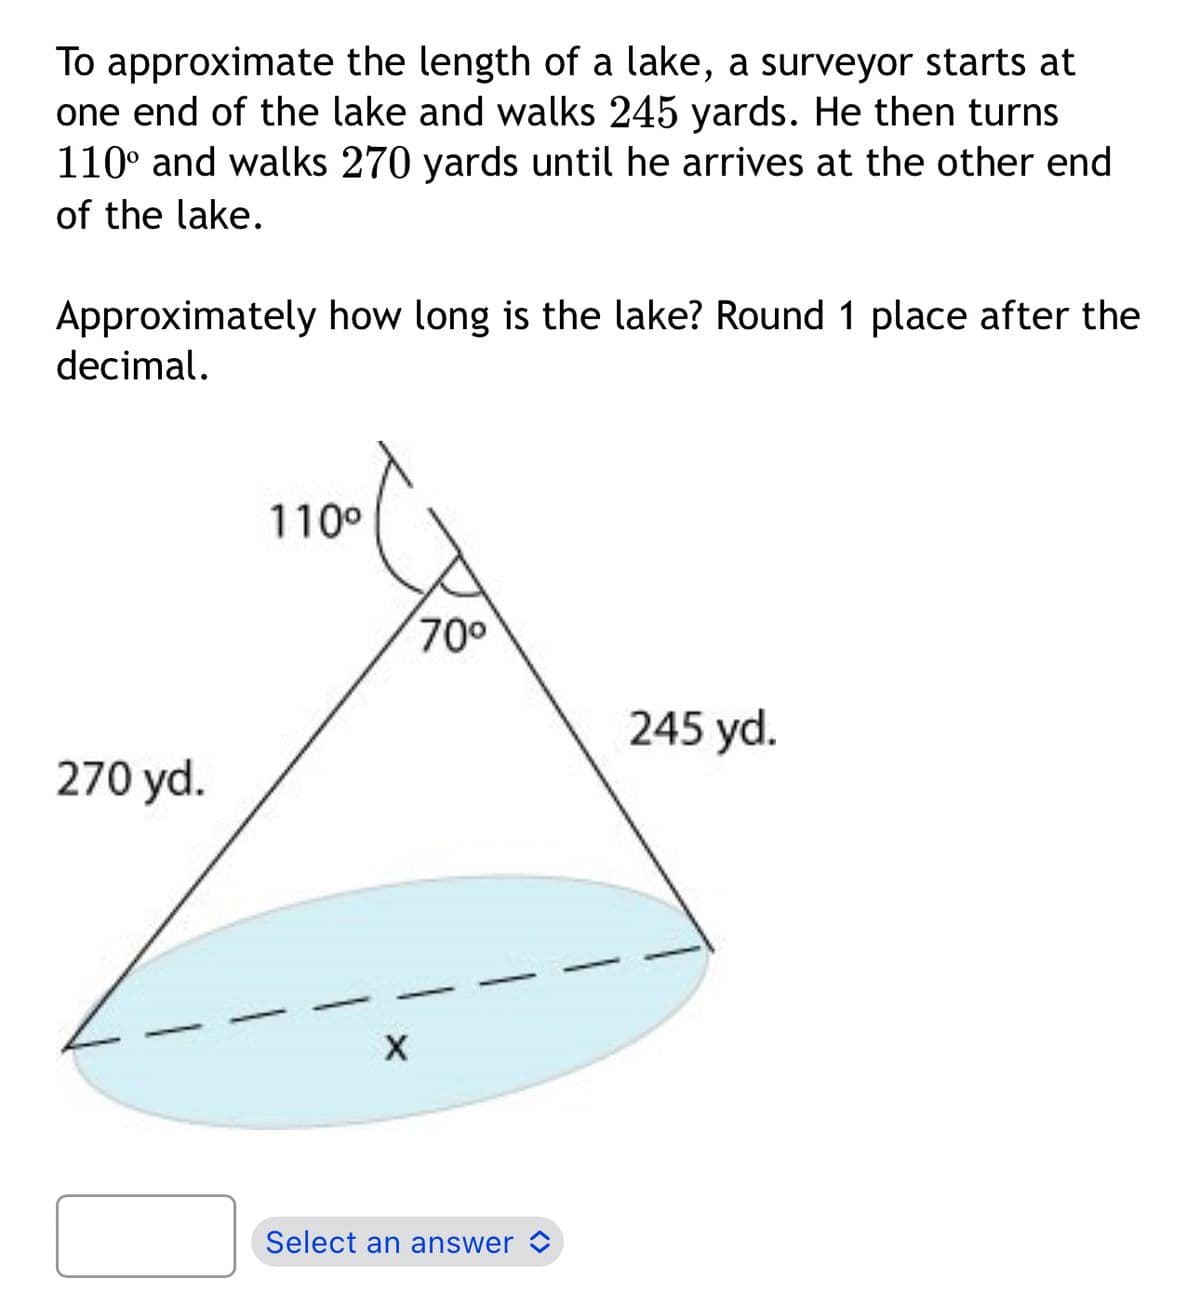 To approximate the length of a lake, a surveyor starts at
one end of the lake and walks 245 yards. He then turns
110° and walks 270 yards until he arrives at the other end
of the lake.
Approximately how long is the lake? Round 1 place after the
decimal.
270 yd.
110⁰
X
70⁰
Select an answer
245 yd.